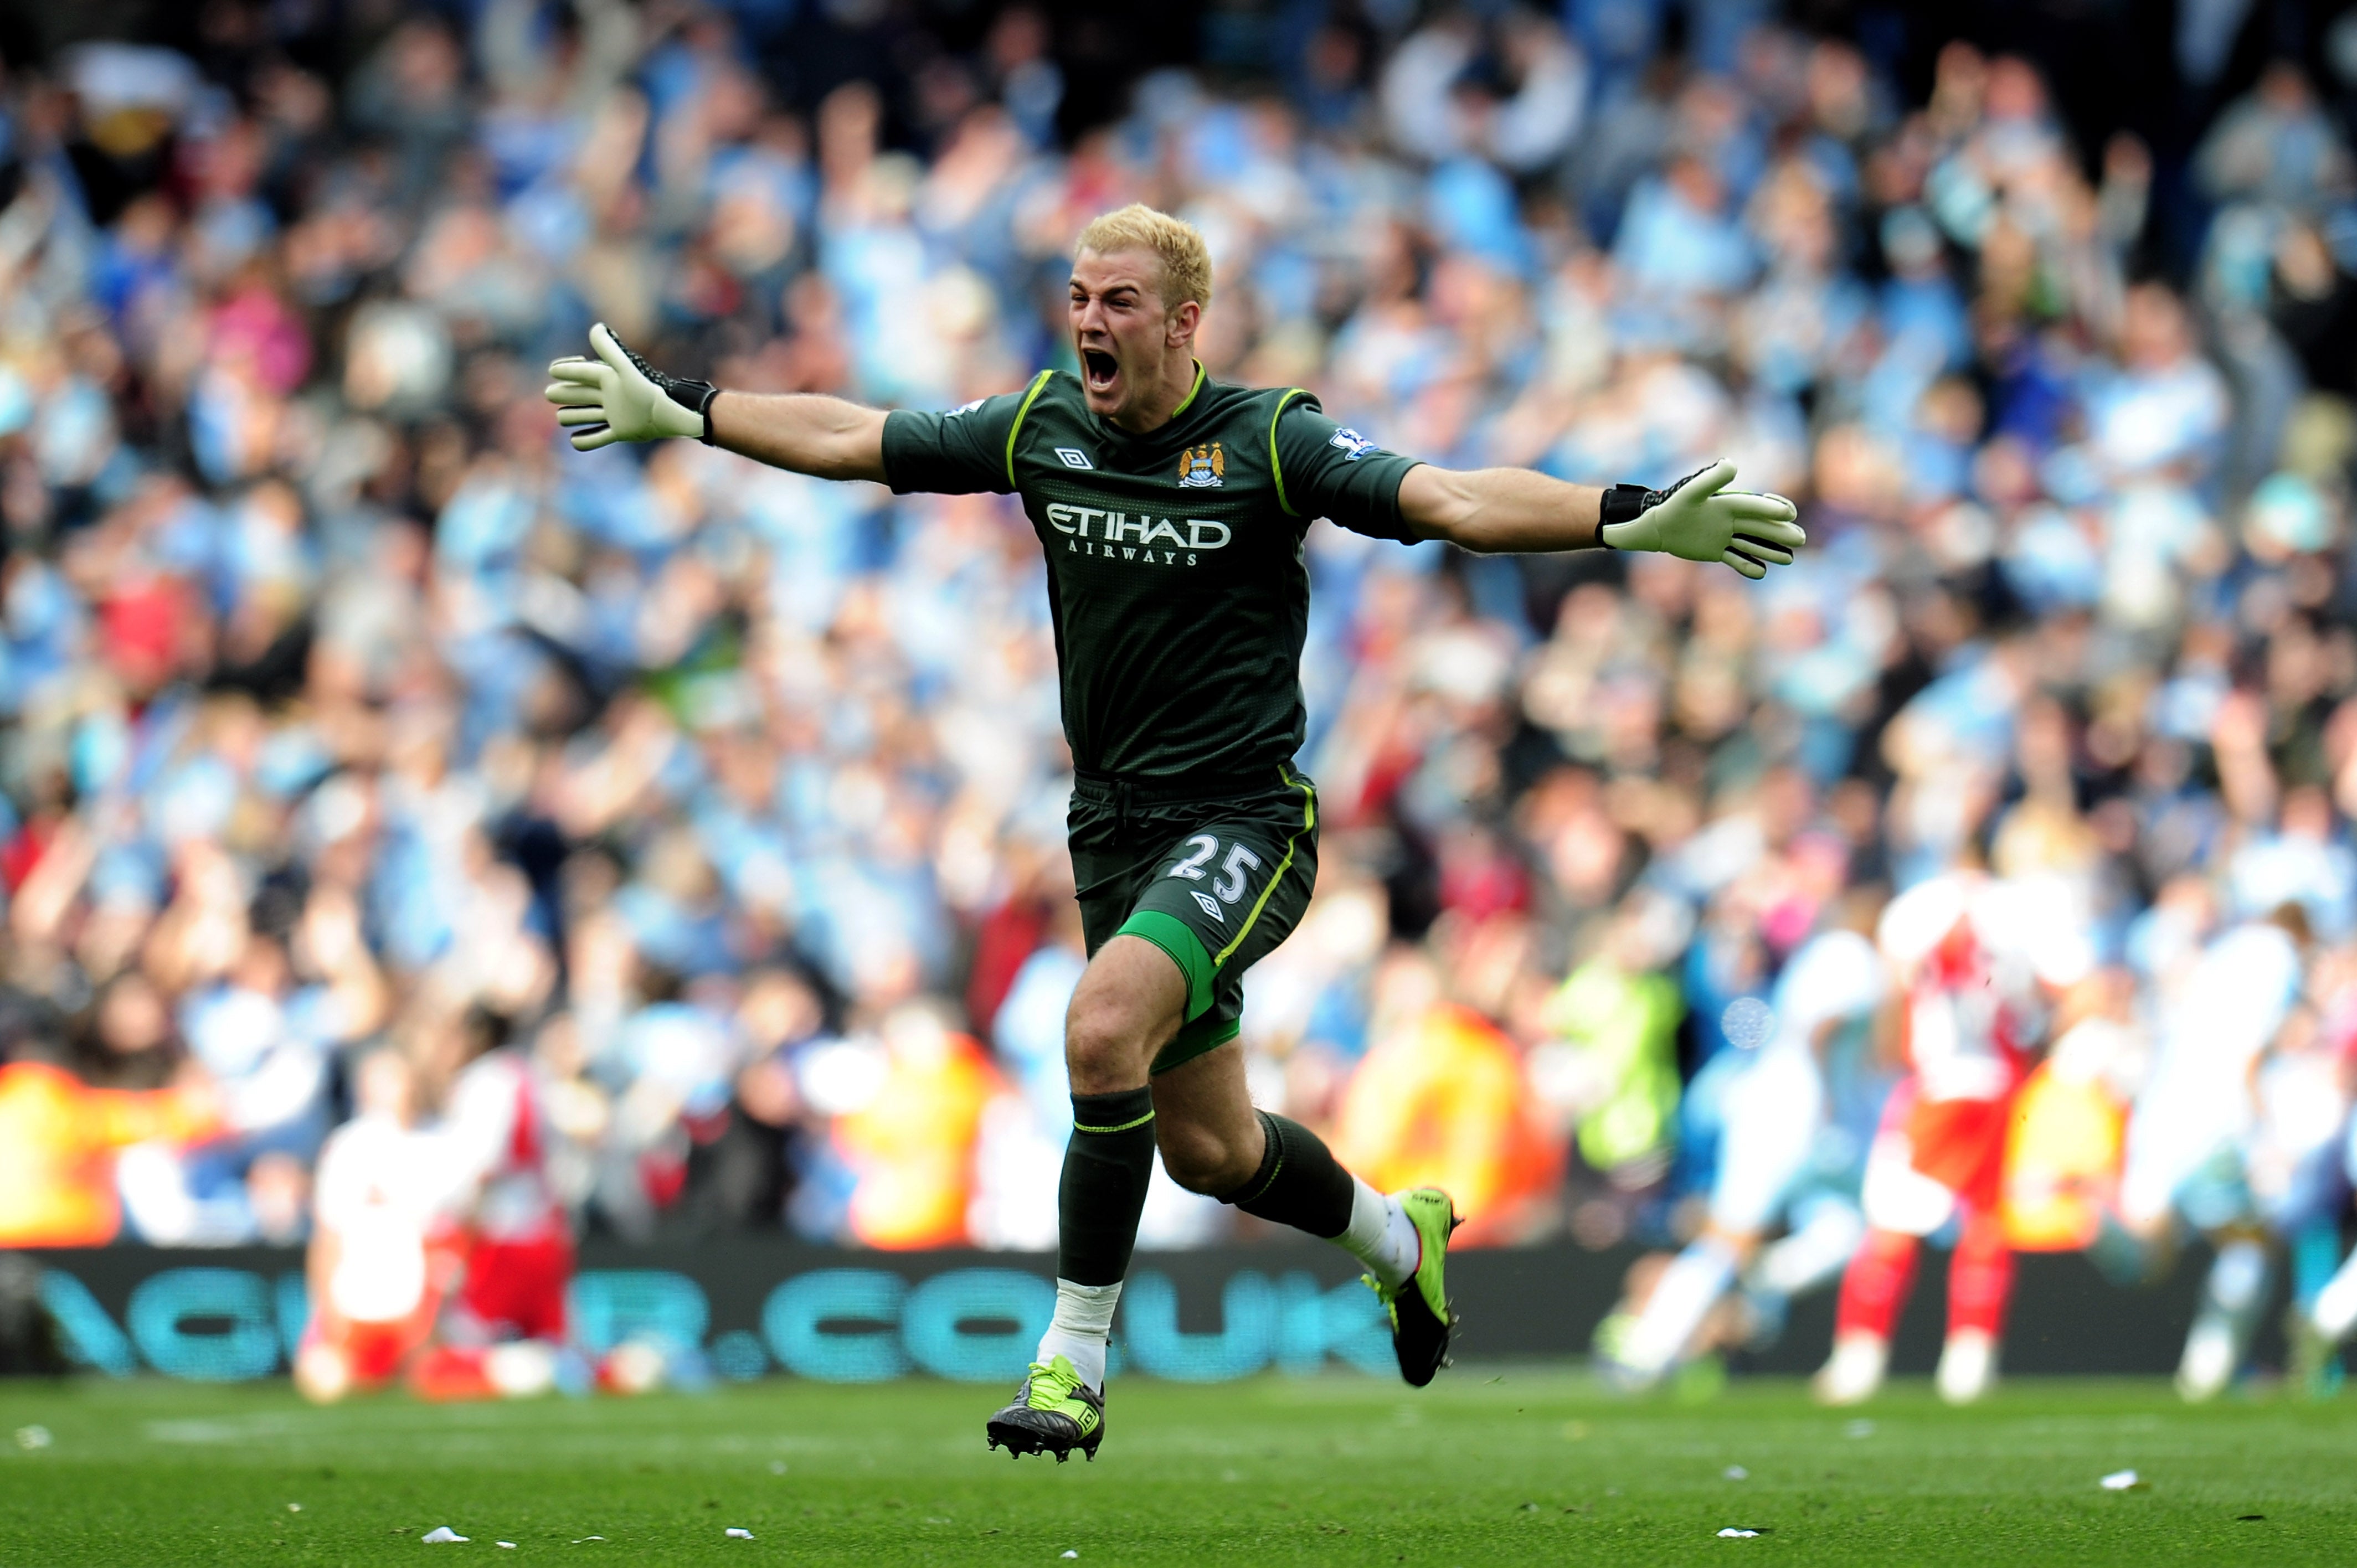 Joe Hart captured his first Premier League title with the club that year